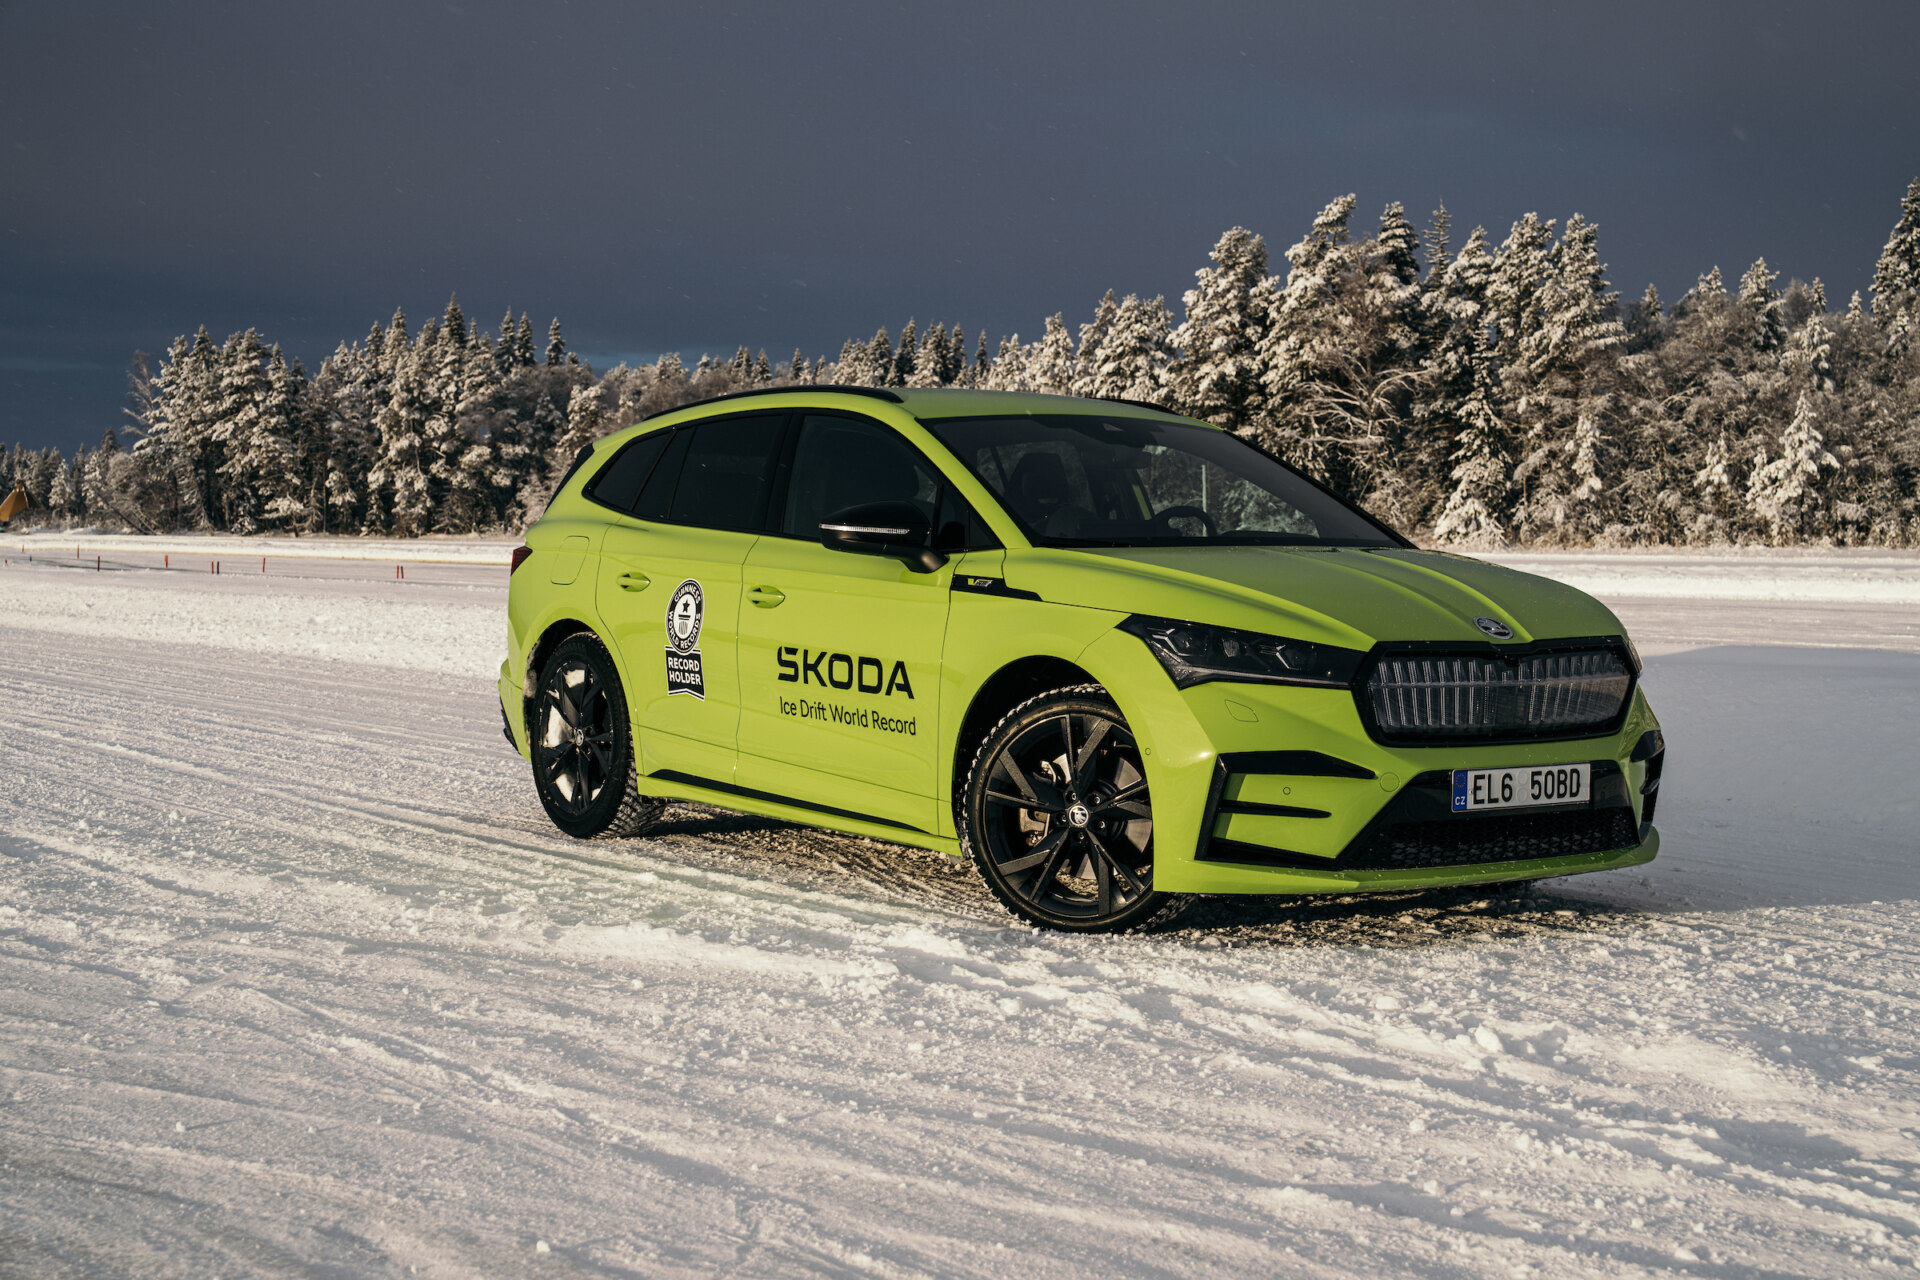 Skoda Drifting on Ice Record<br /> 20th January 2023<br /> Sweden<br /> Copyright Malcom Griffiths<br /> Contact:malcy1970@me.com<br /> IG:@malcy1970